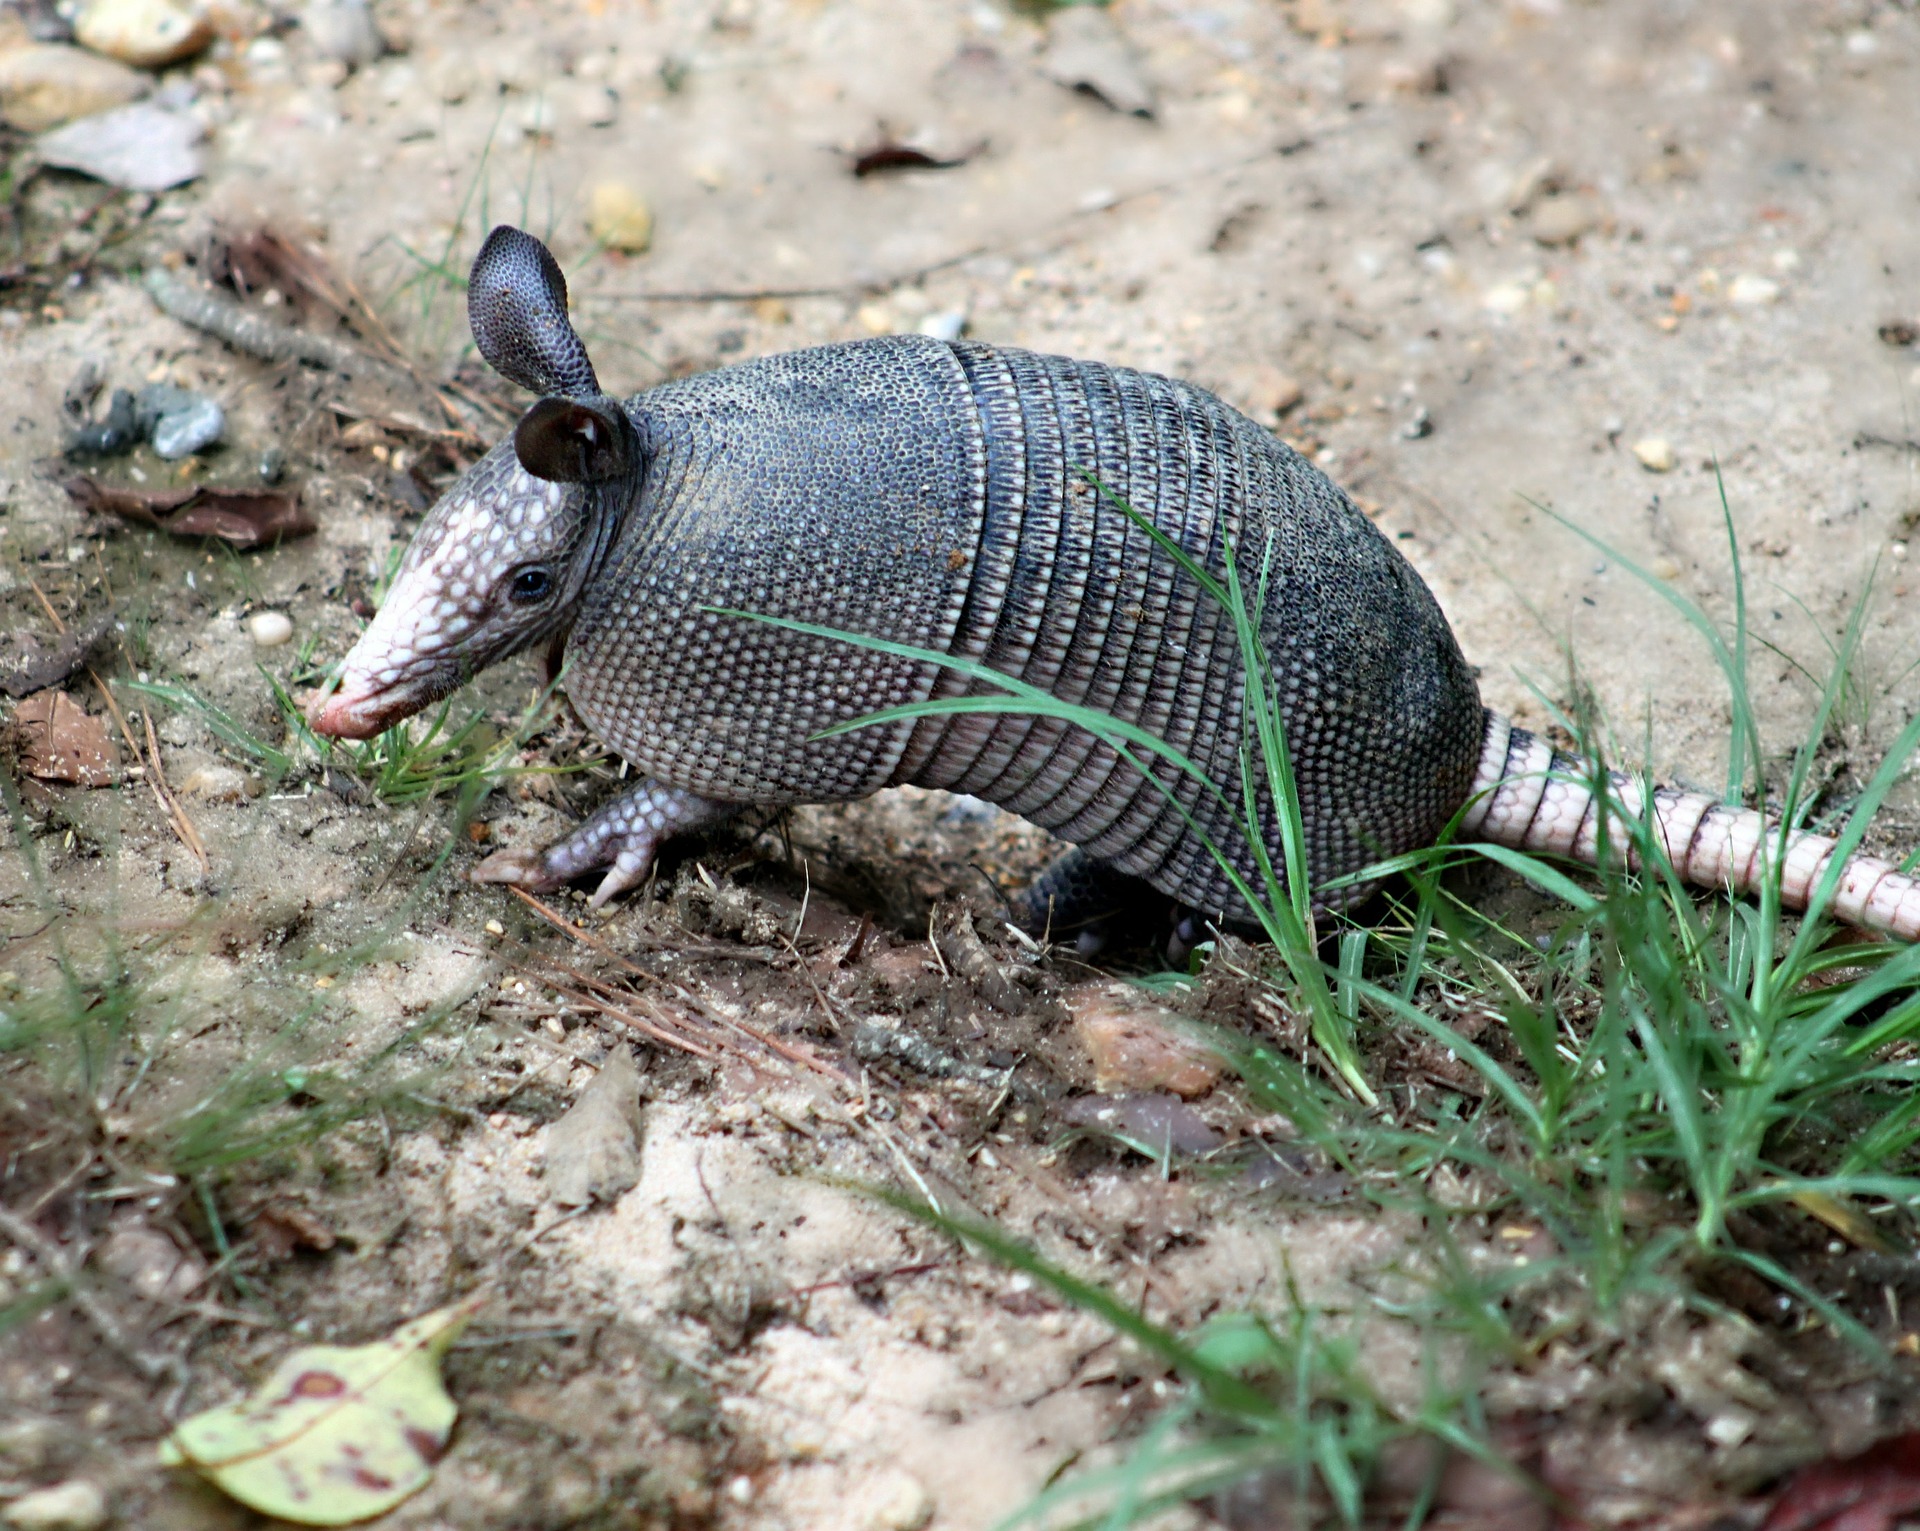 See armadillos and more when you engage in sightseeing in Fort Morgan